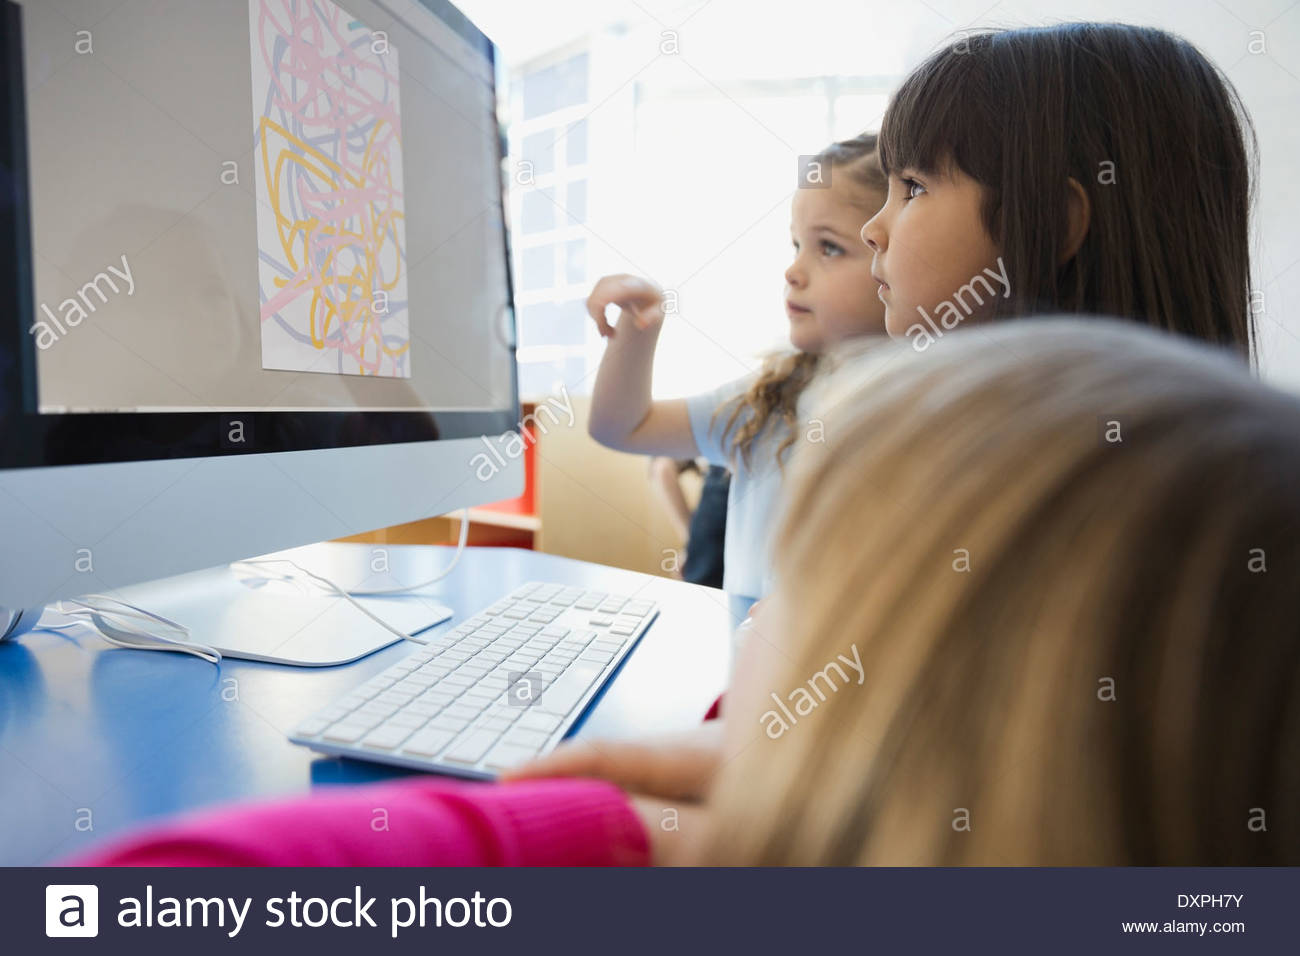 Girls drawing on computer in school Stock Photo